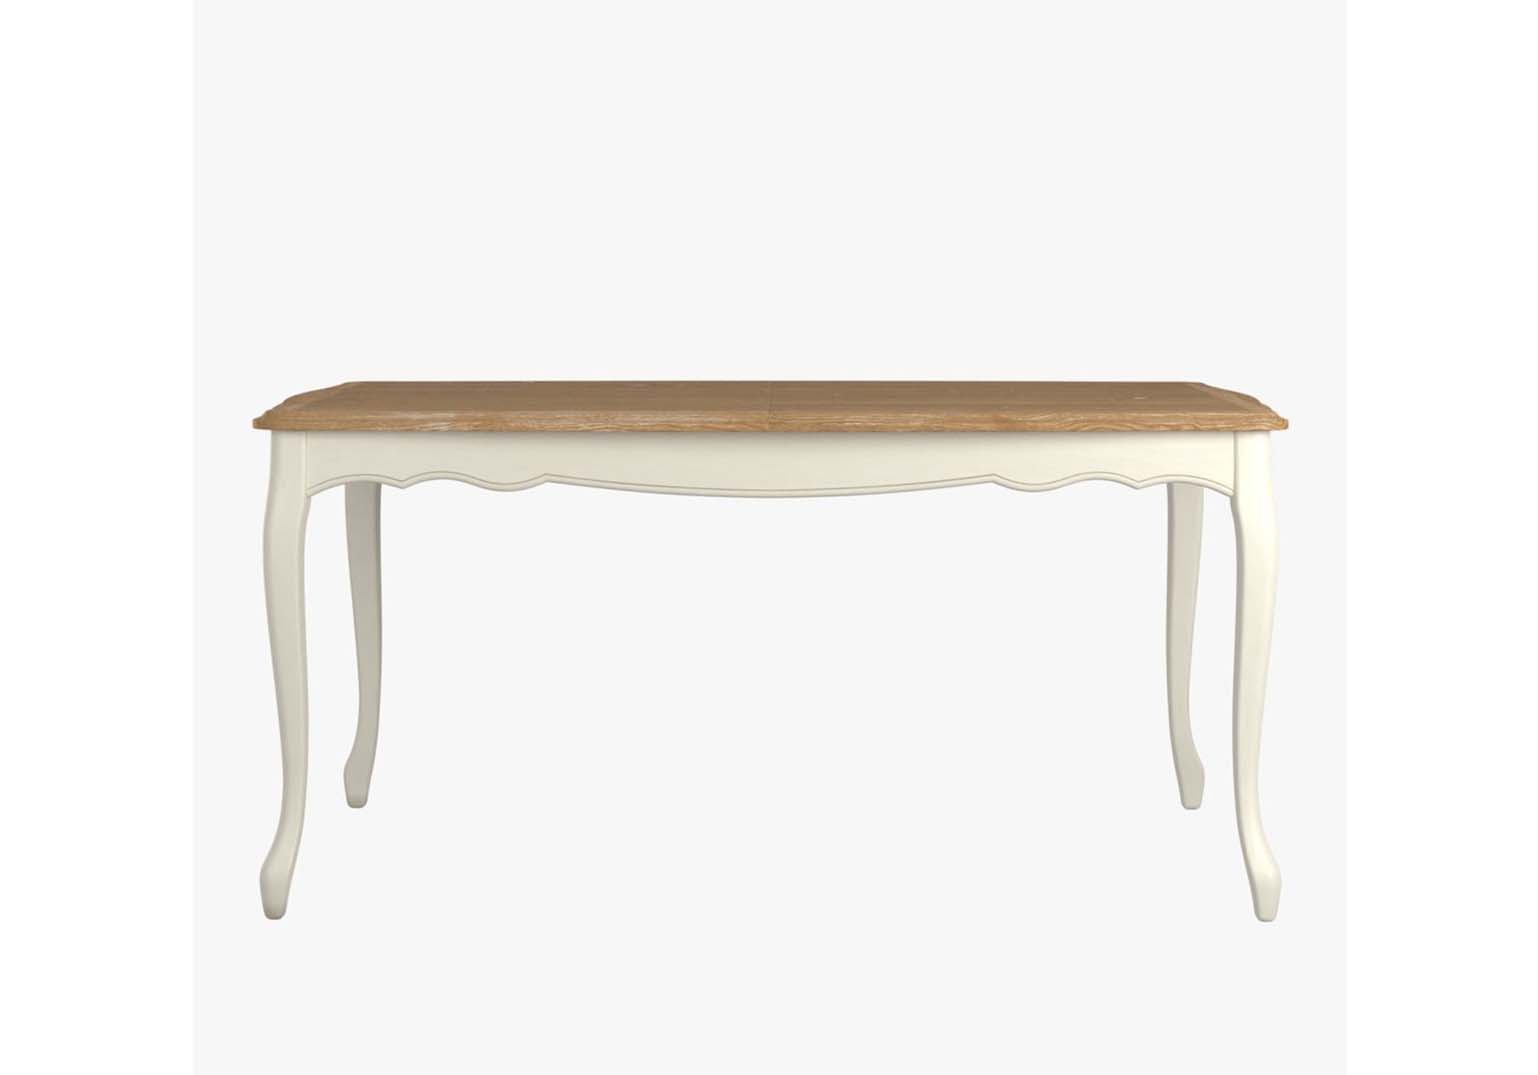 Dining Elegance Redefined: Exclusive Tables for Every Home